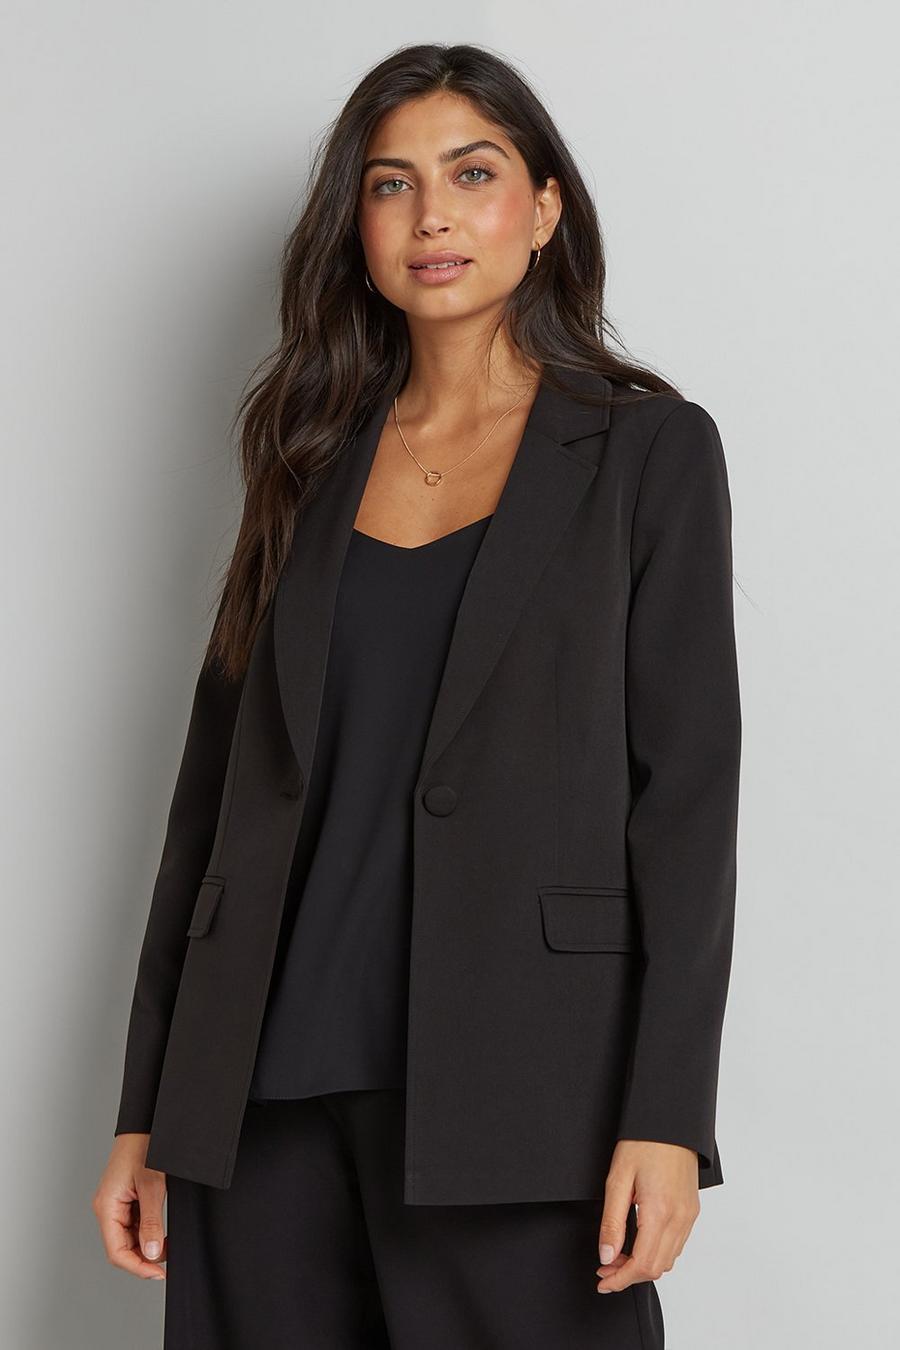 Single Breasted Suit Blazer